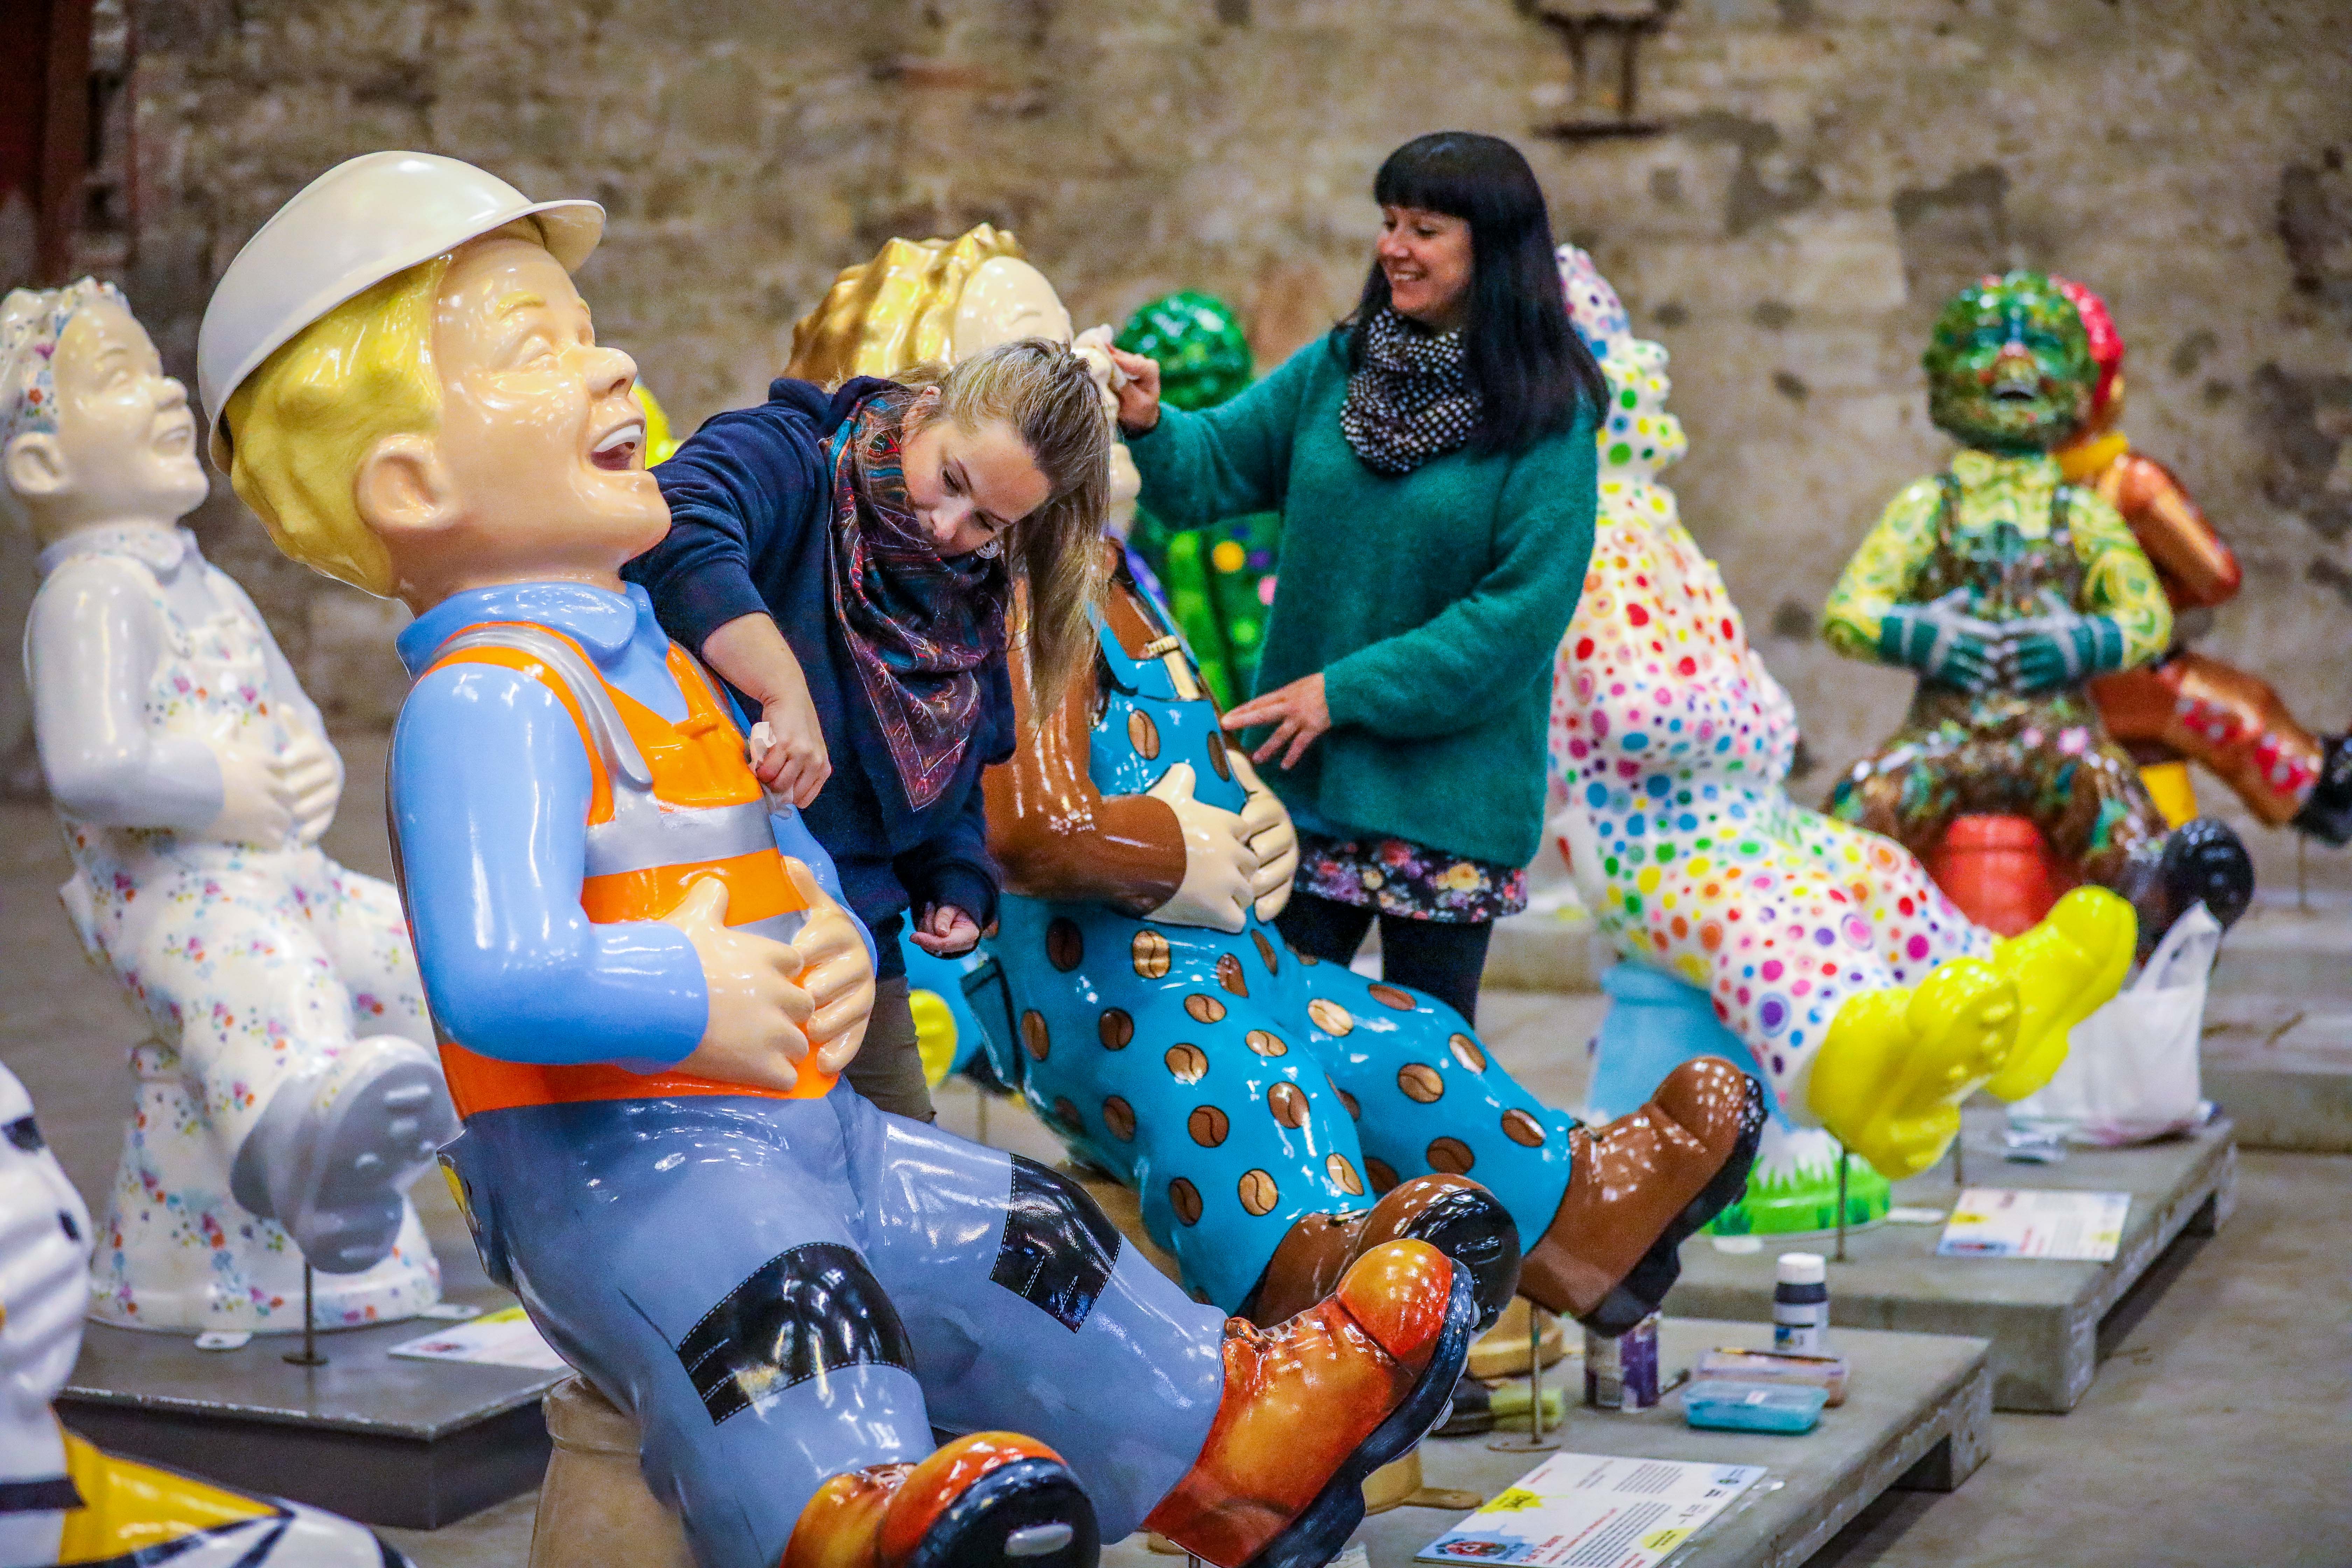 Oor Wullie sculptures in Dundee are cleaned up ahead of the farewell events